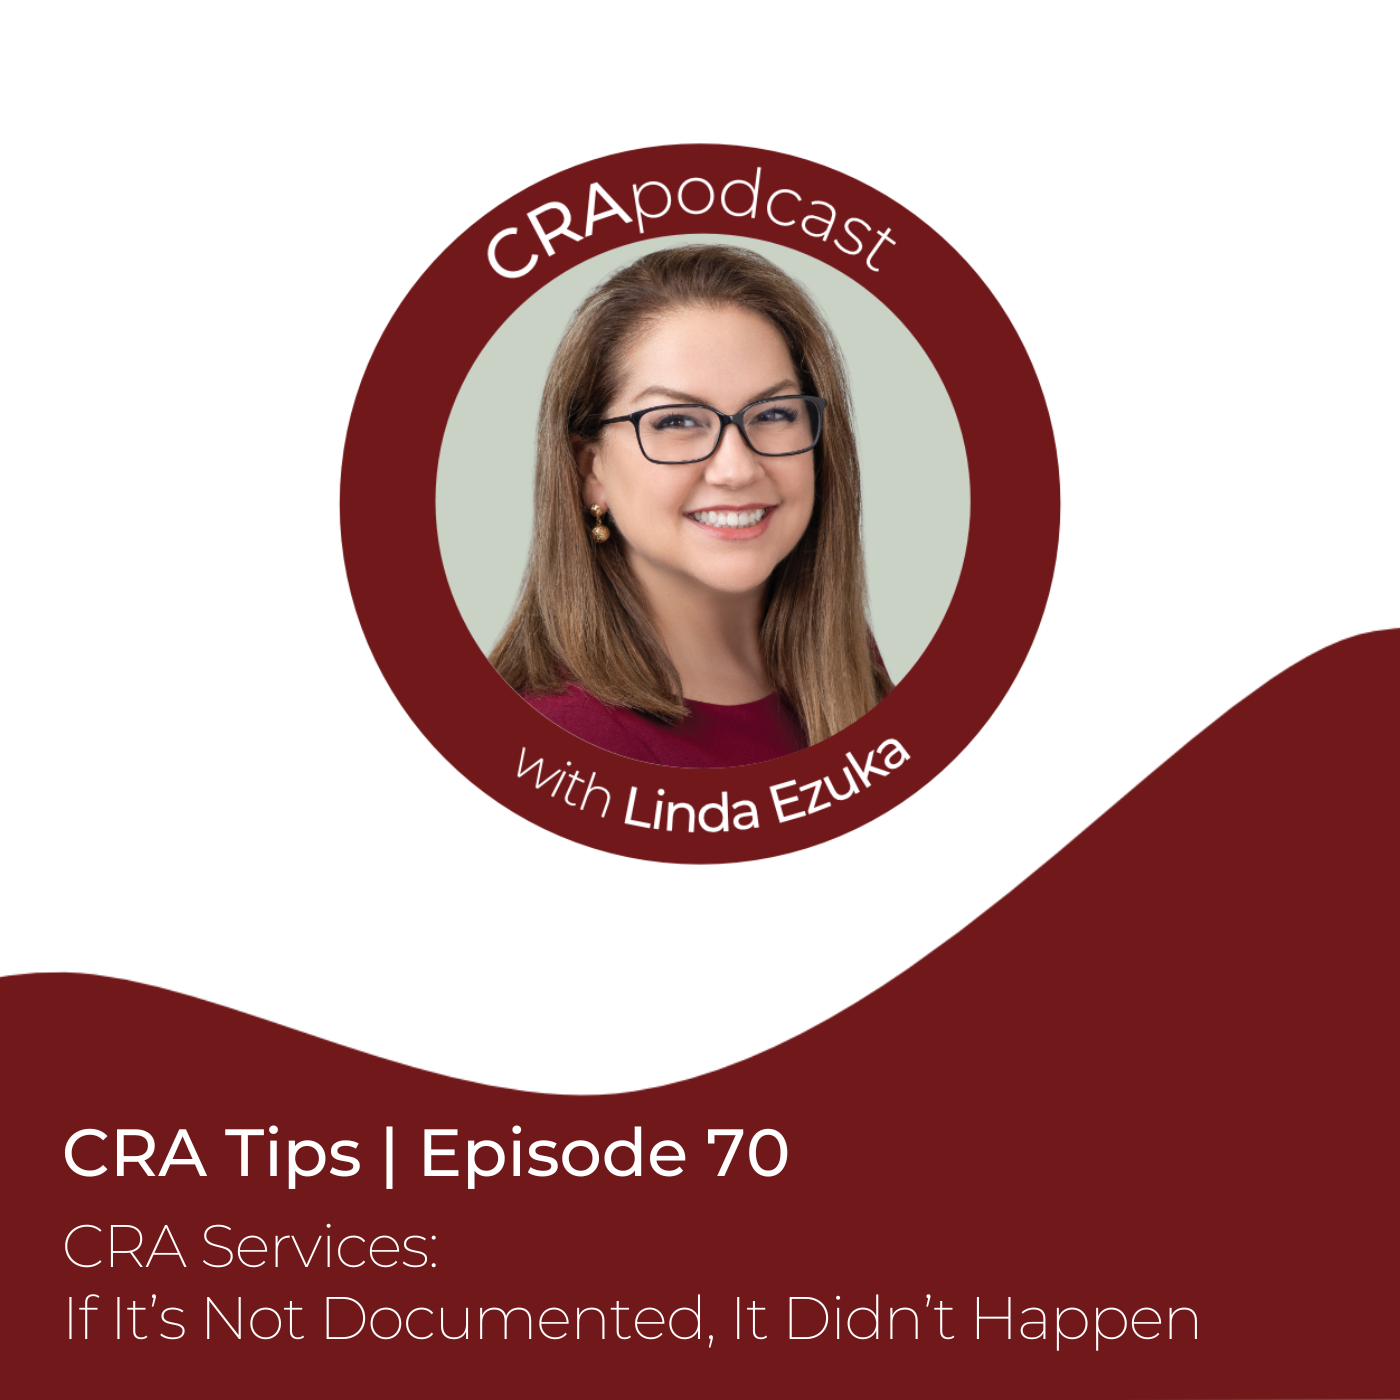 CRA Services: If It’s Not Documented, It Didn’t Happen